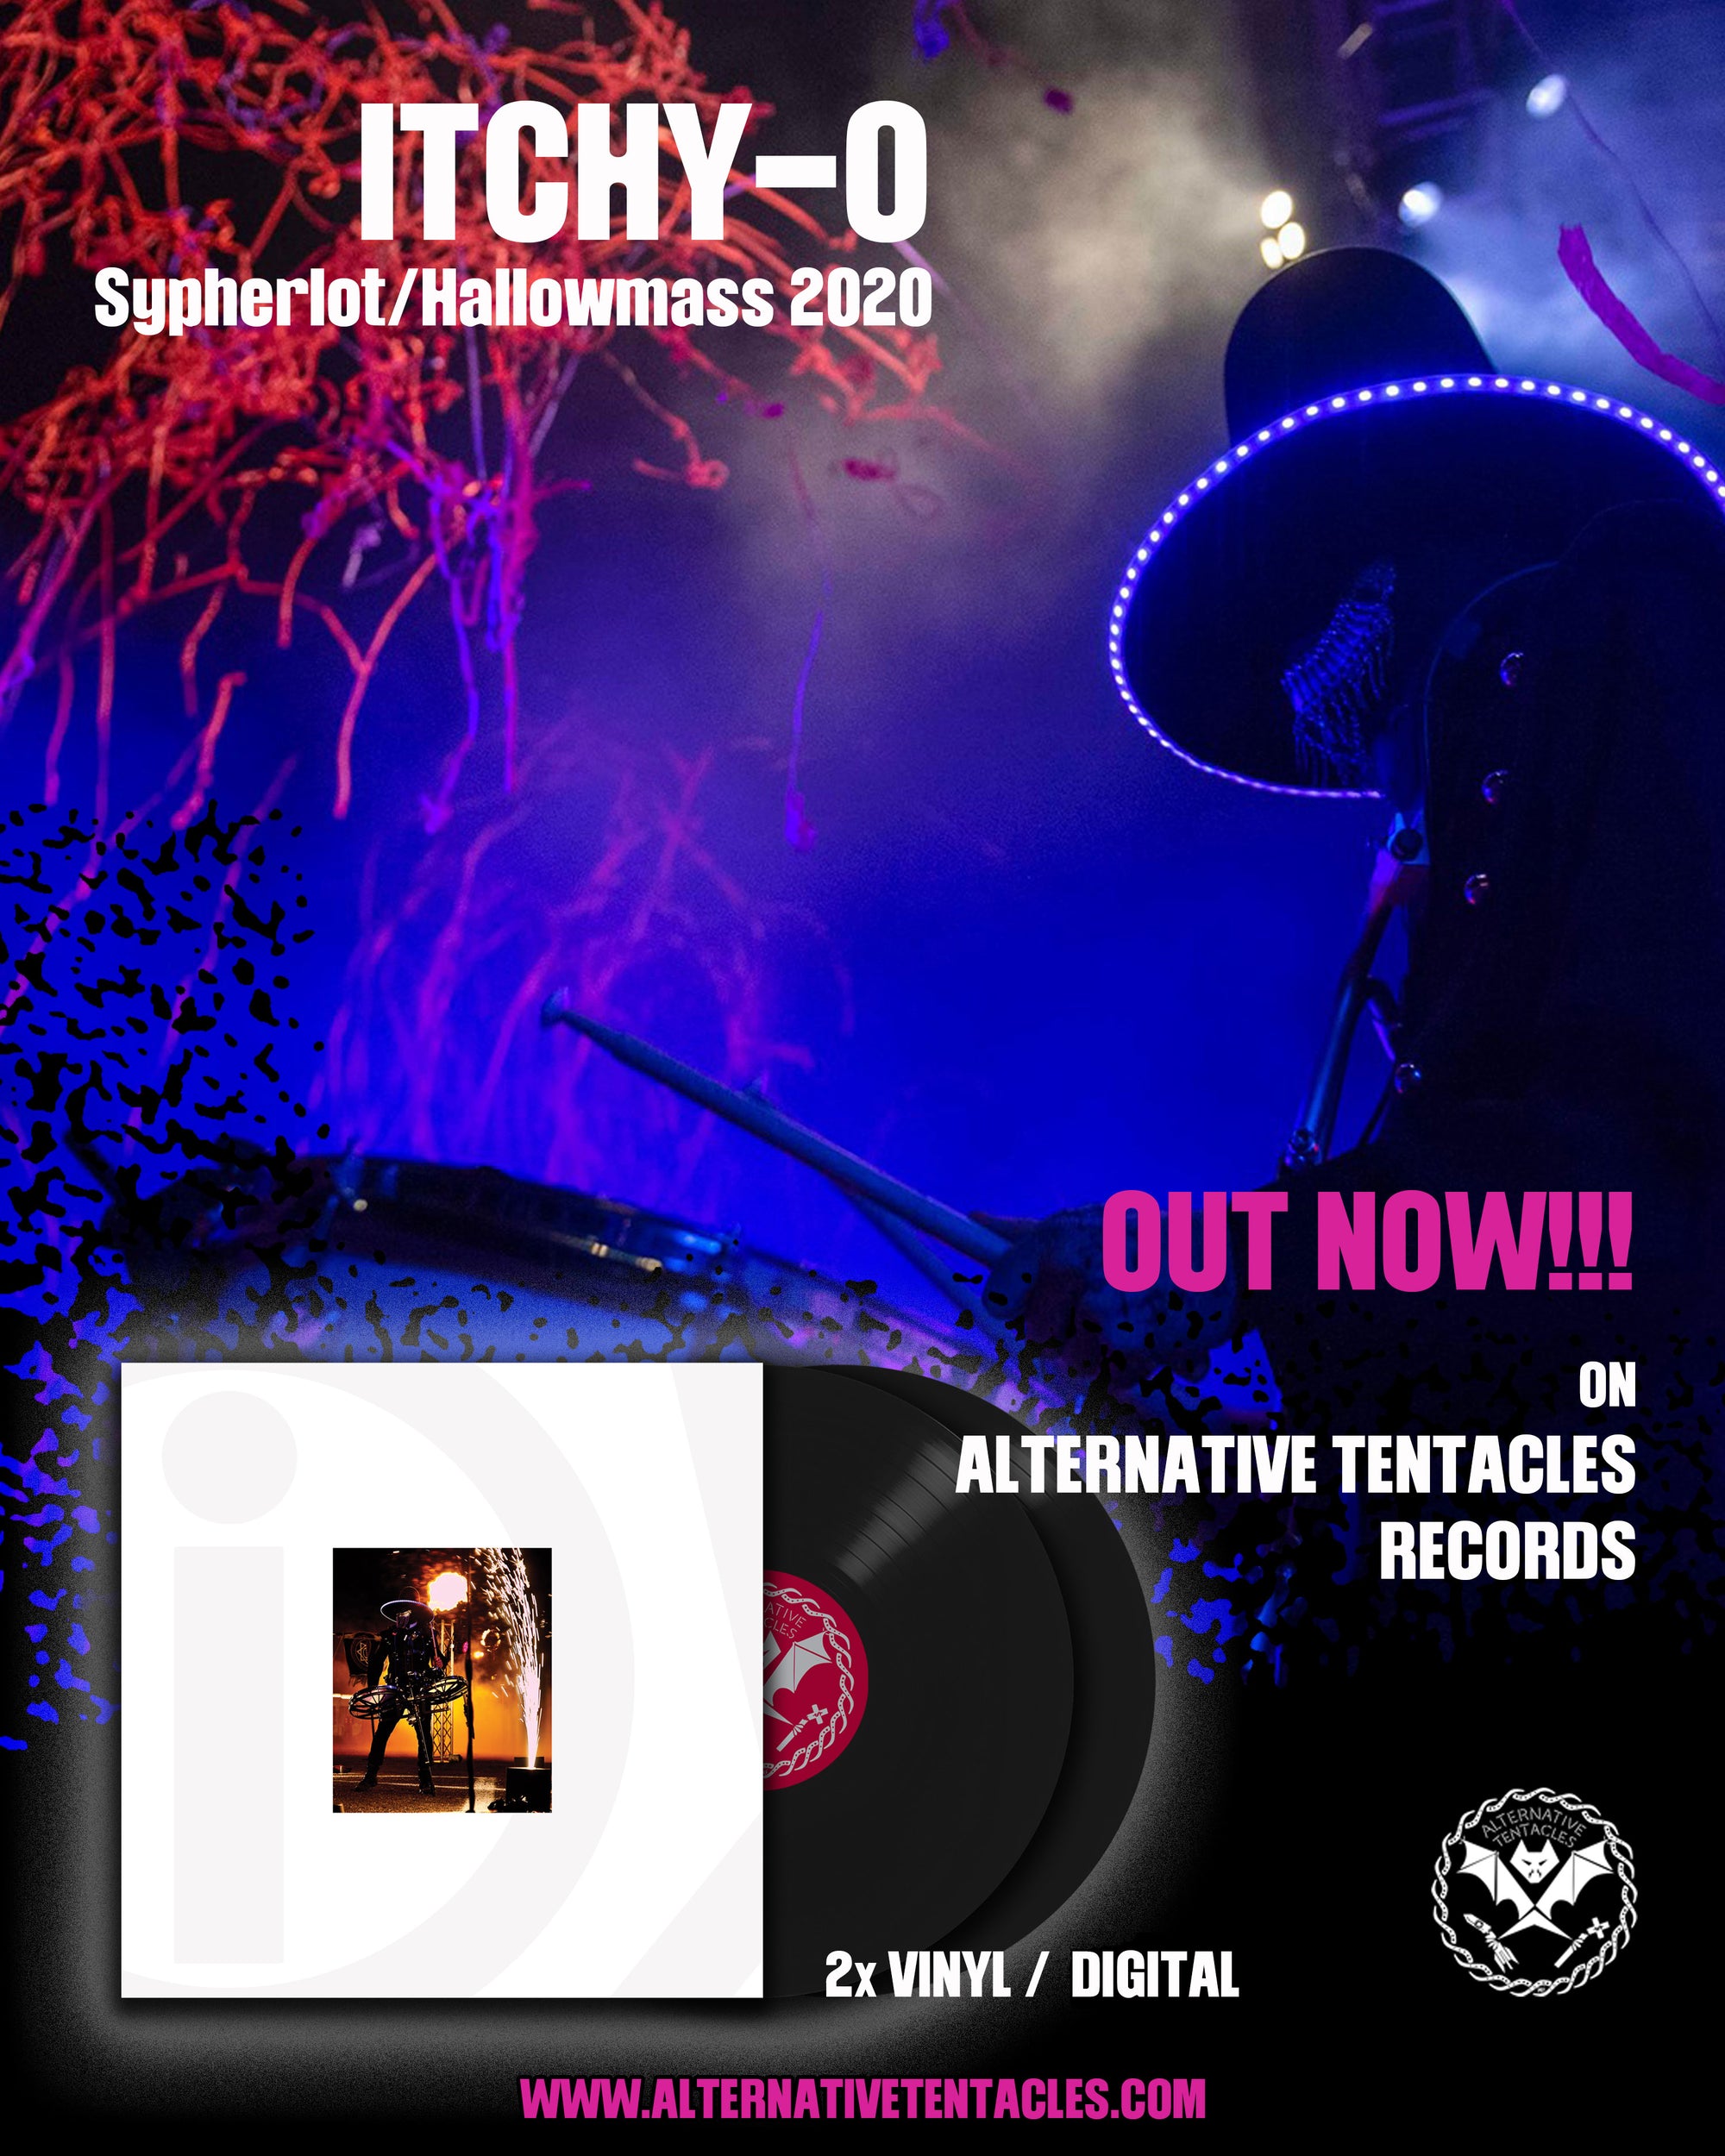 ITCHY-O "SYPHERLOT/HALLOWMASS 2020" OUT NOW!